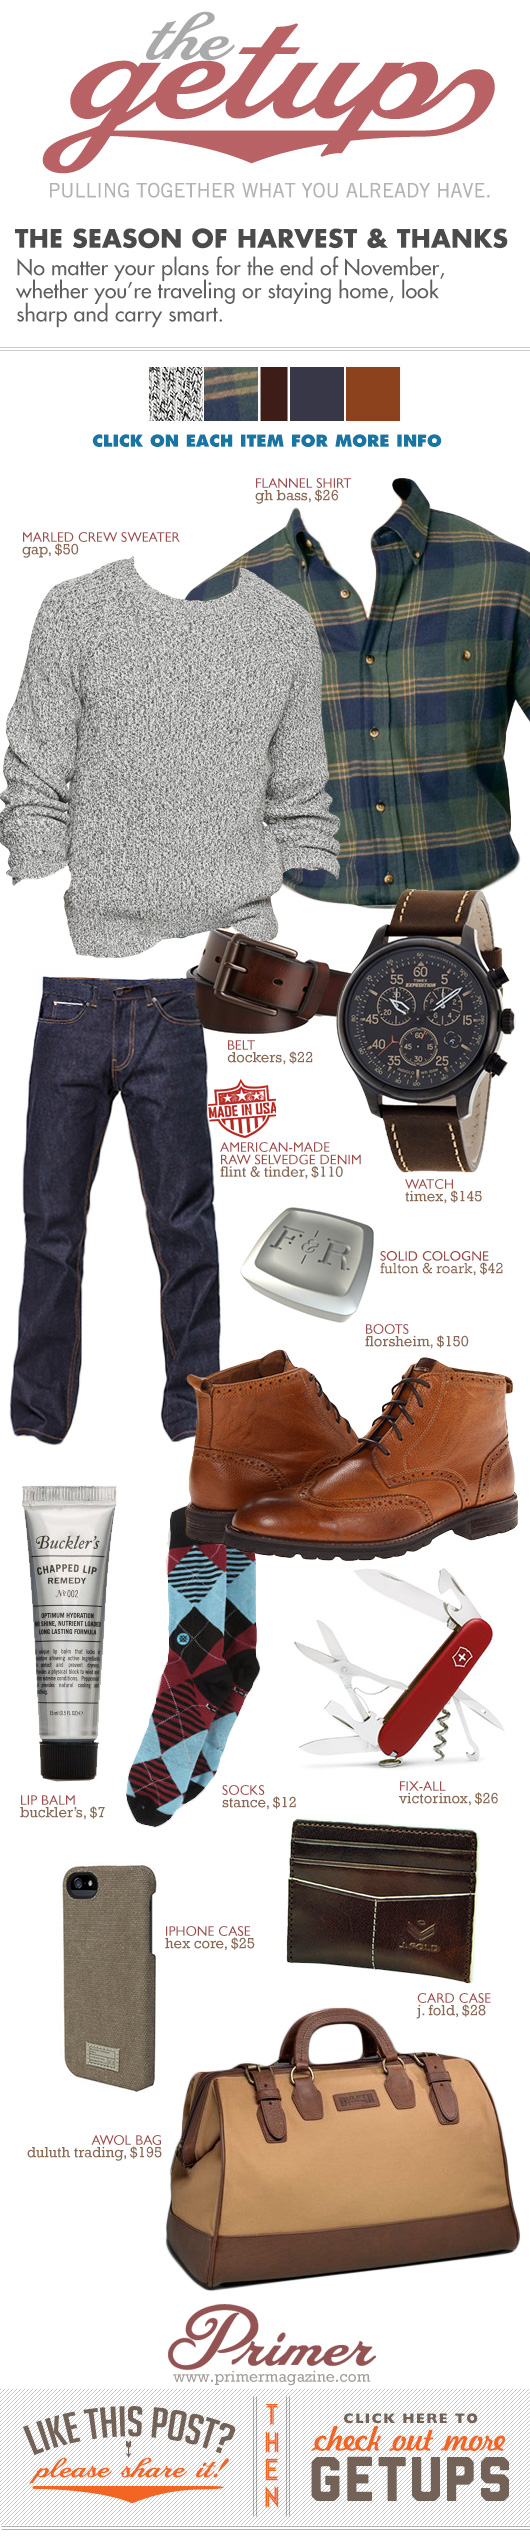 Getup Season of Harvest and Thanks - Gray sweater, plaid shirt, blue jeans, wingtip boots